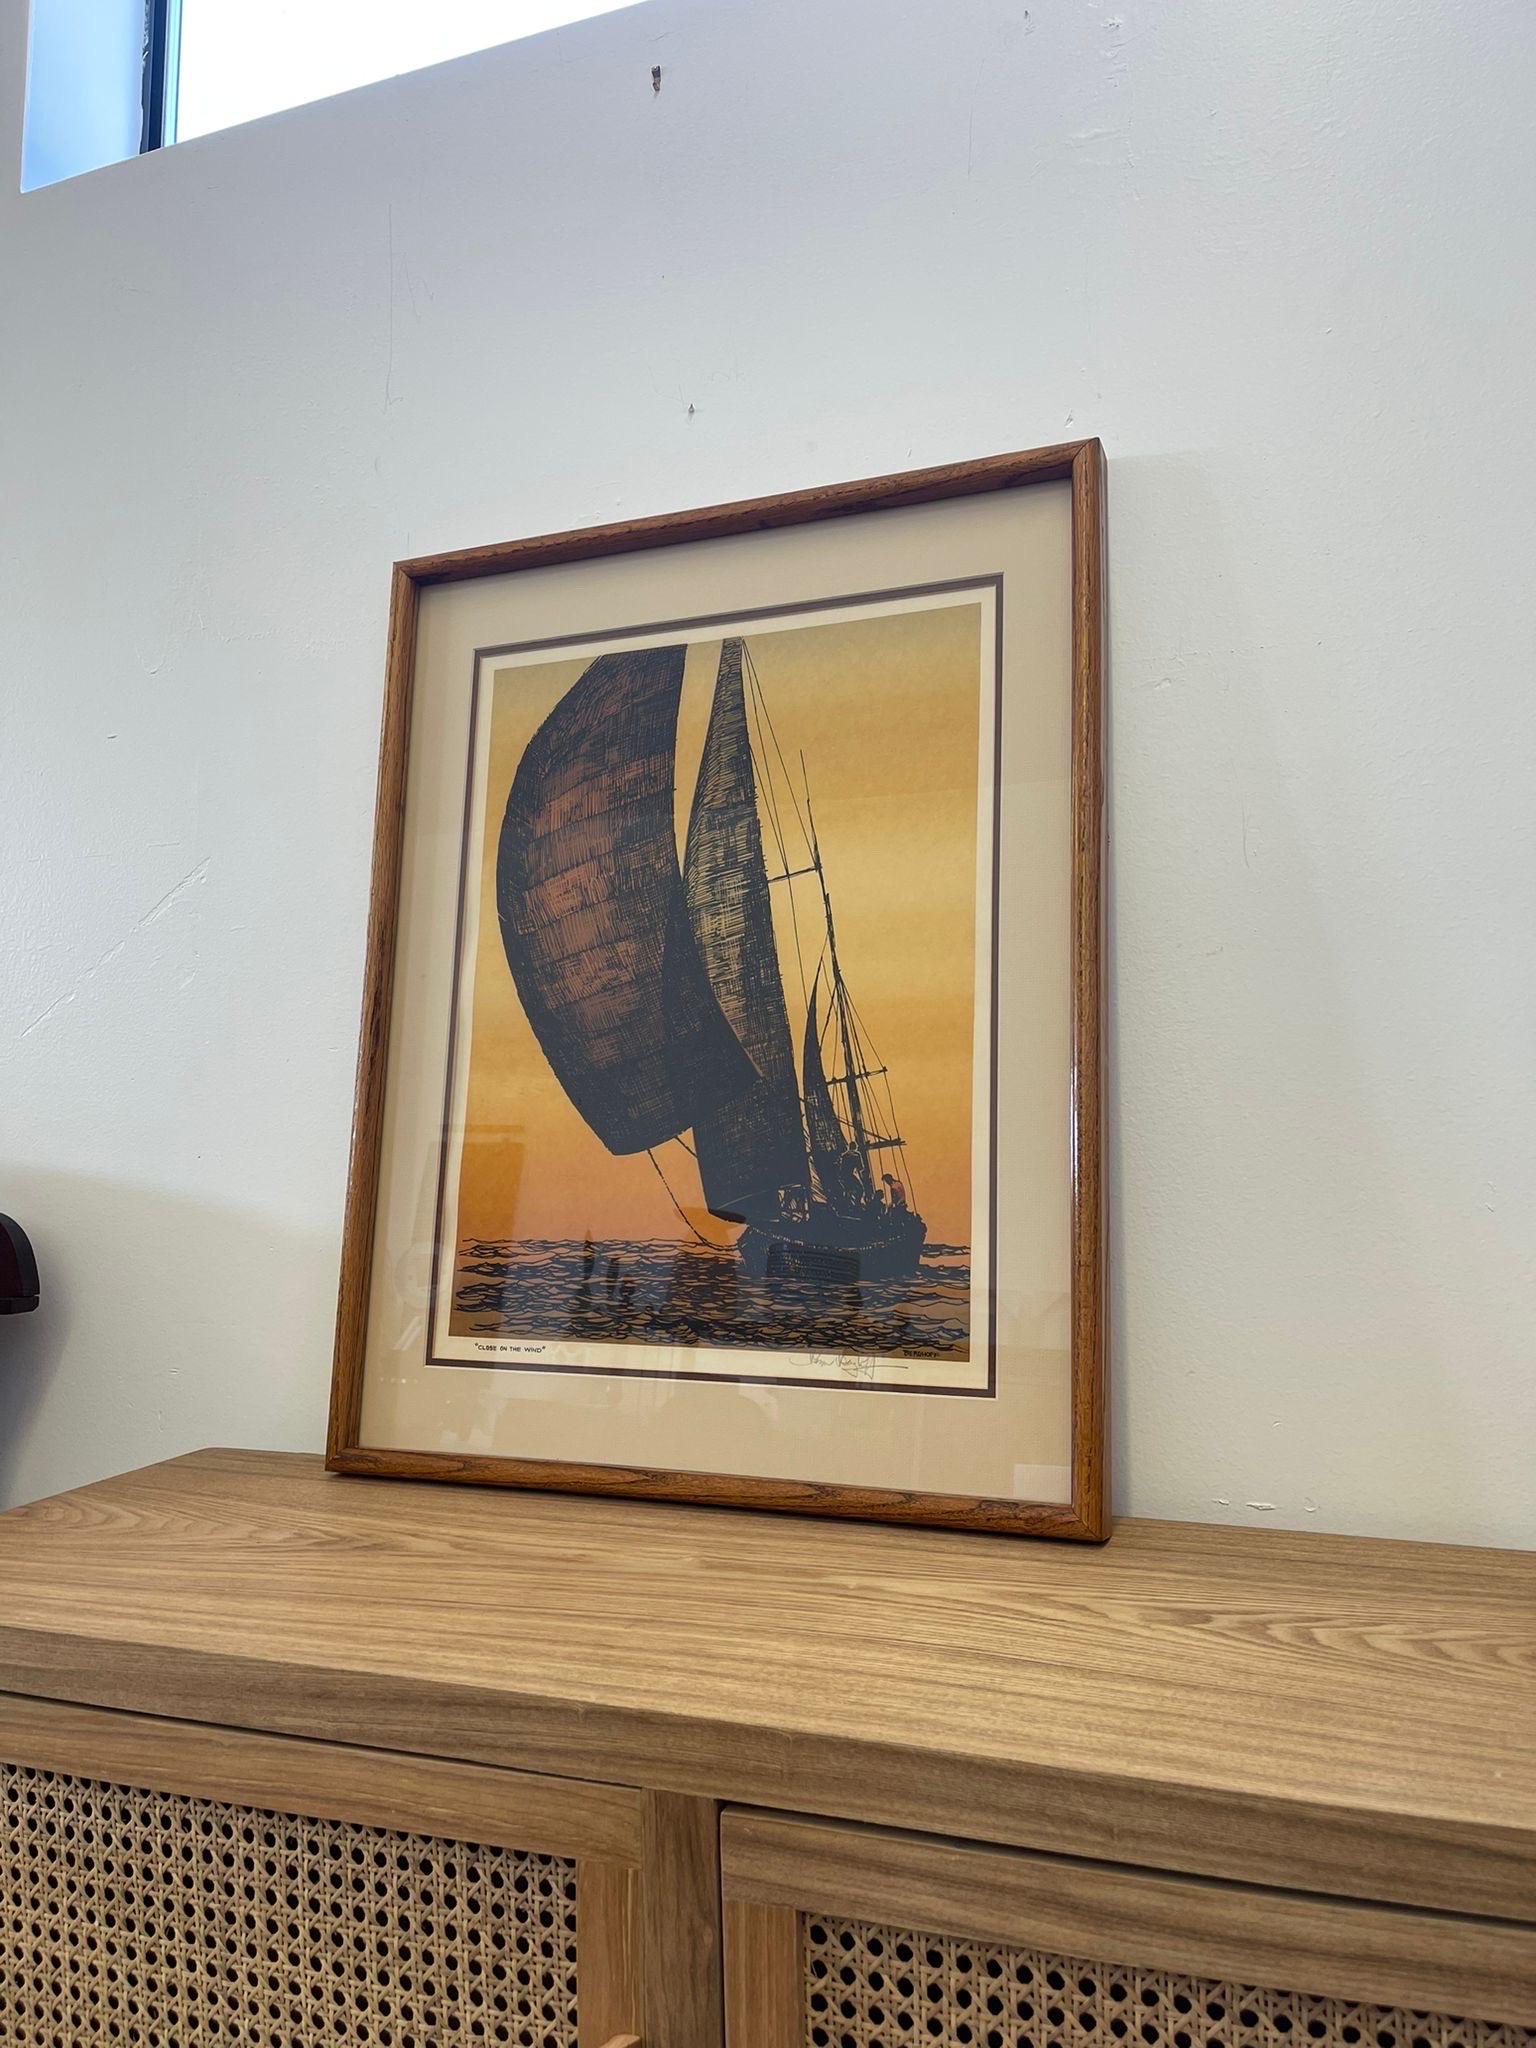 This Print features a scenic view of a sail boat on water with a yellow toned background. Made by Washington Artist. Framed and Matted within wooden frame. Vintage Condition Consistent with Age as Pictured.

Dimensions. 23 W ; 1/2 D ; 29 H